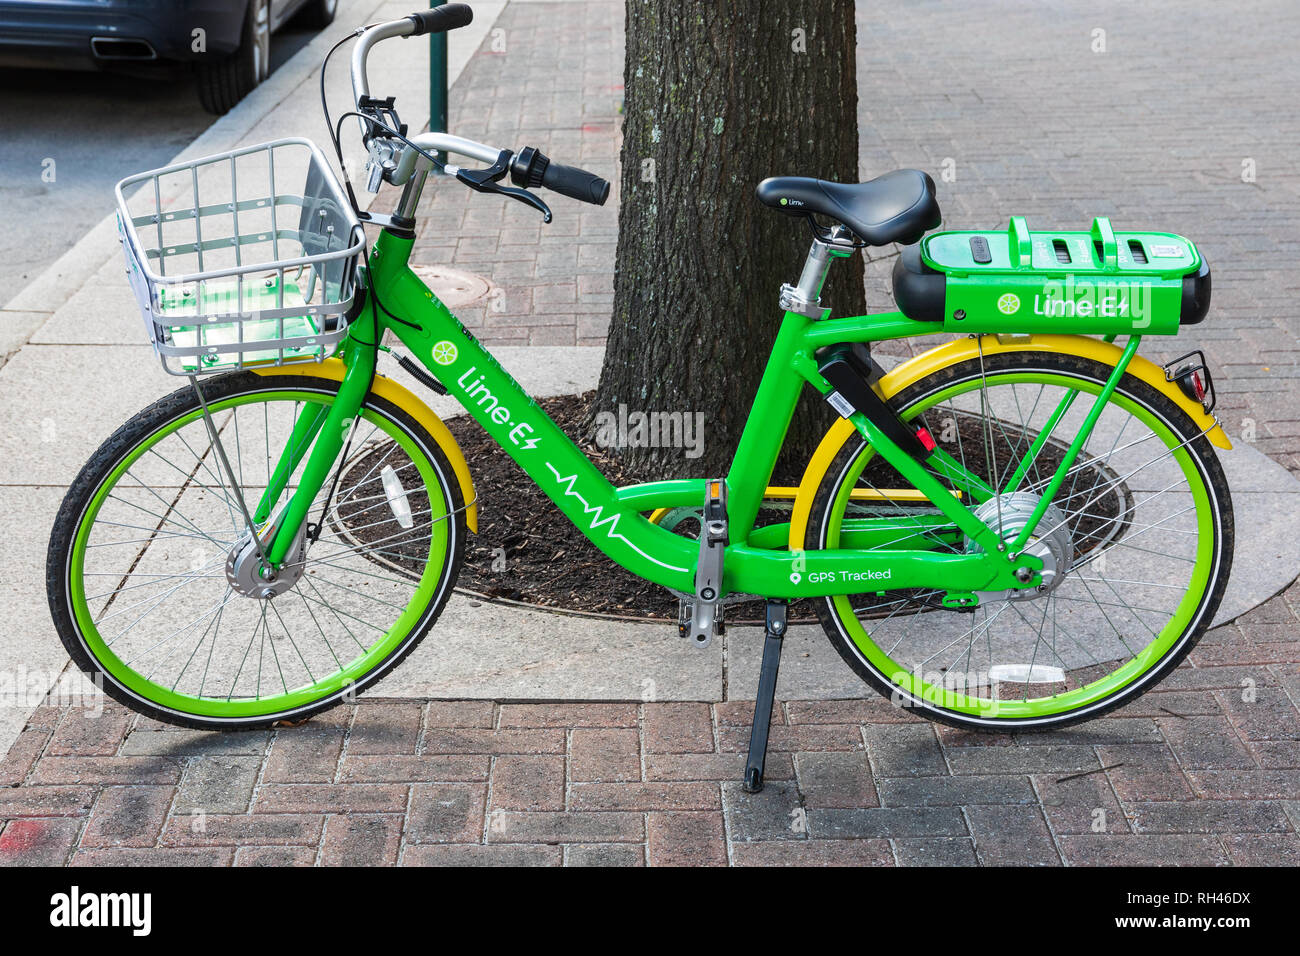 CHARLOTTE, NC, USA-1/24/19: A Lime e-assist bicycle parked on Tryon St. sidewalk. The bikes are unlocked using a smartphone app. Stock Photo